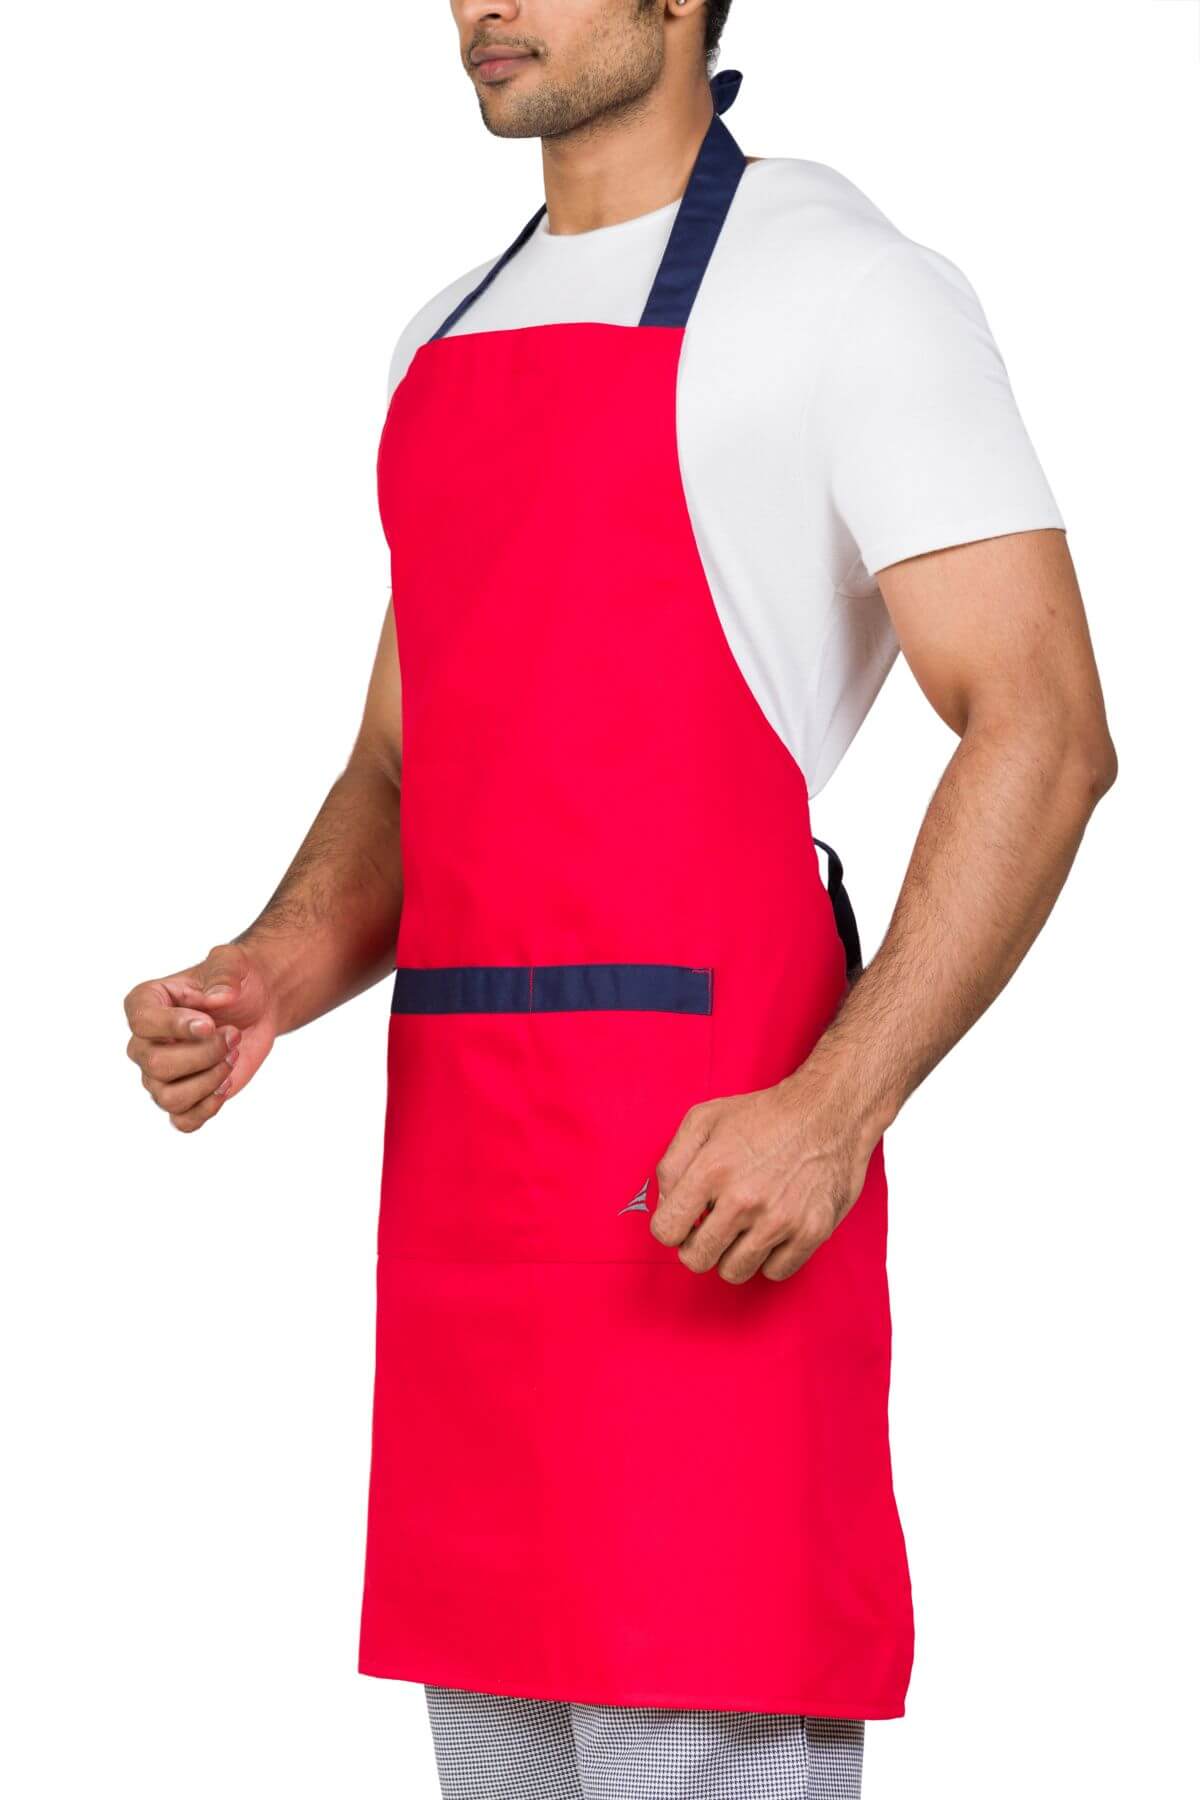 Red-Navy Cotton Blend Adjustable Full Apron For Kitchen & Hospitality